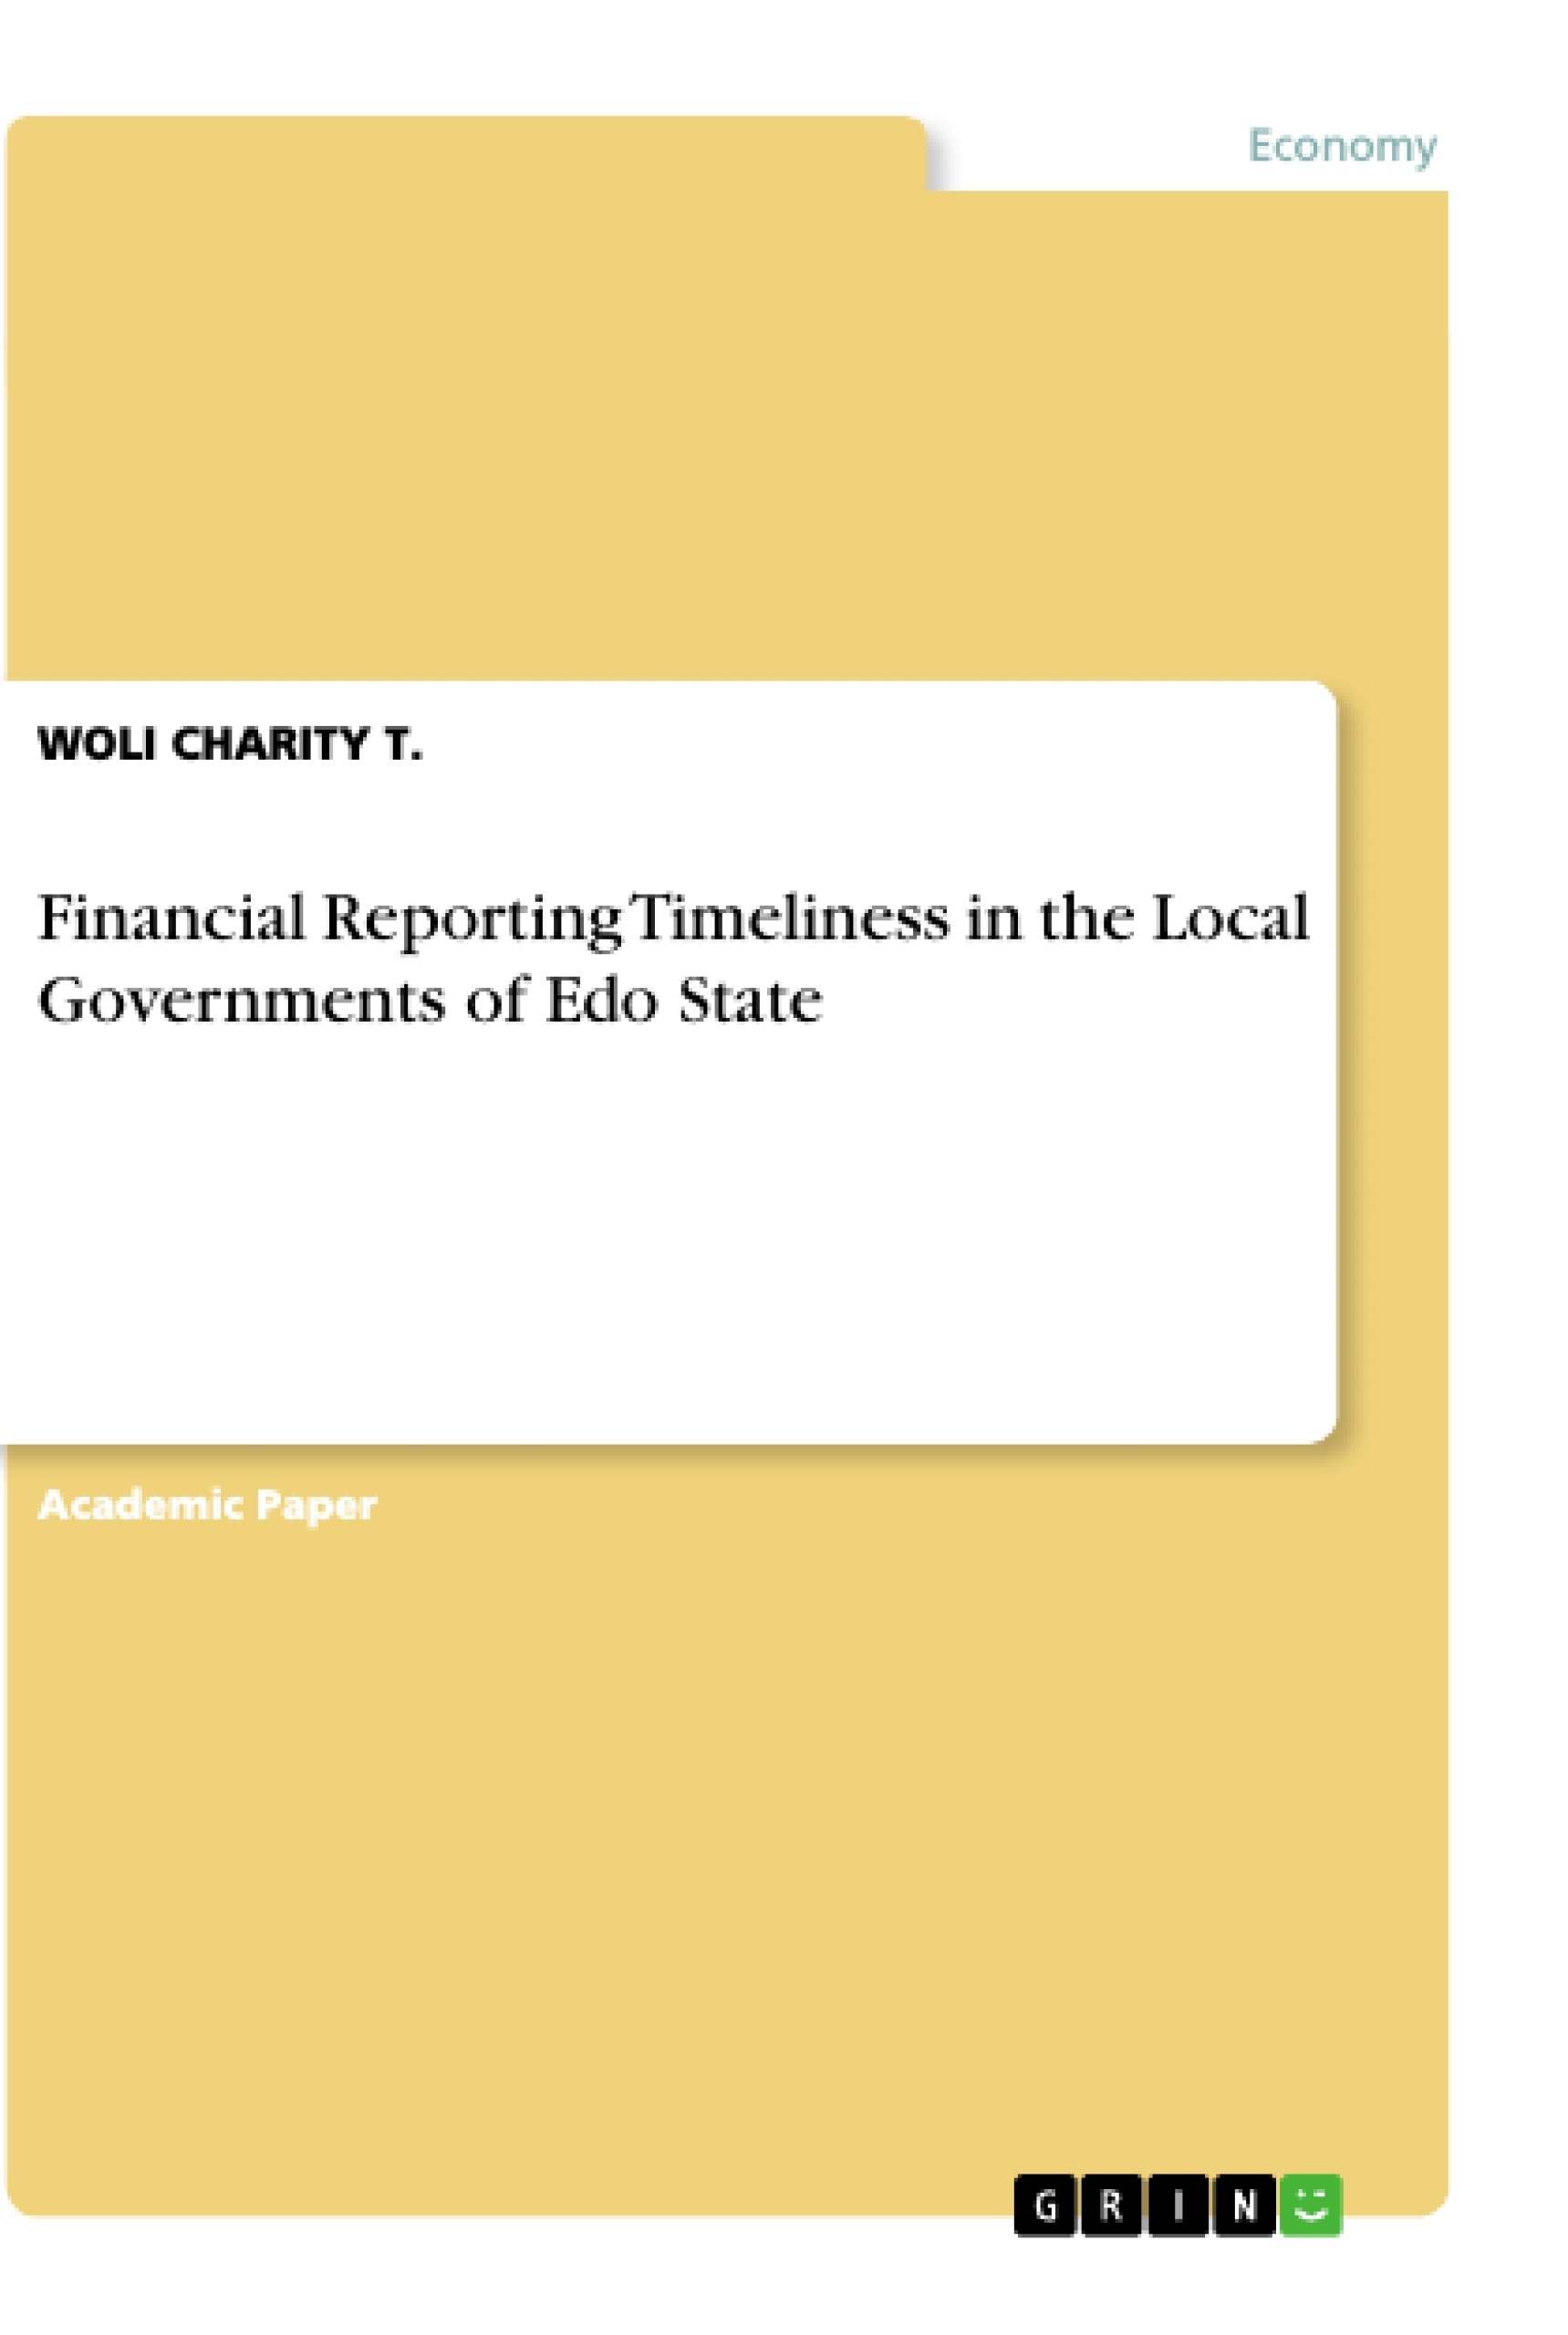 Title: Financial Reporting Timeliness in the Local Governments of Edo State